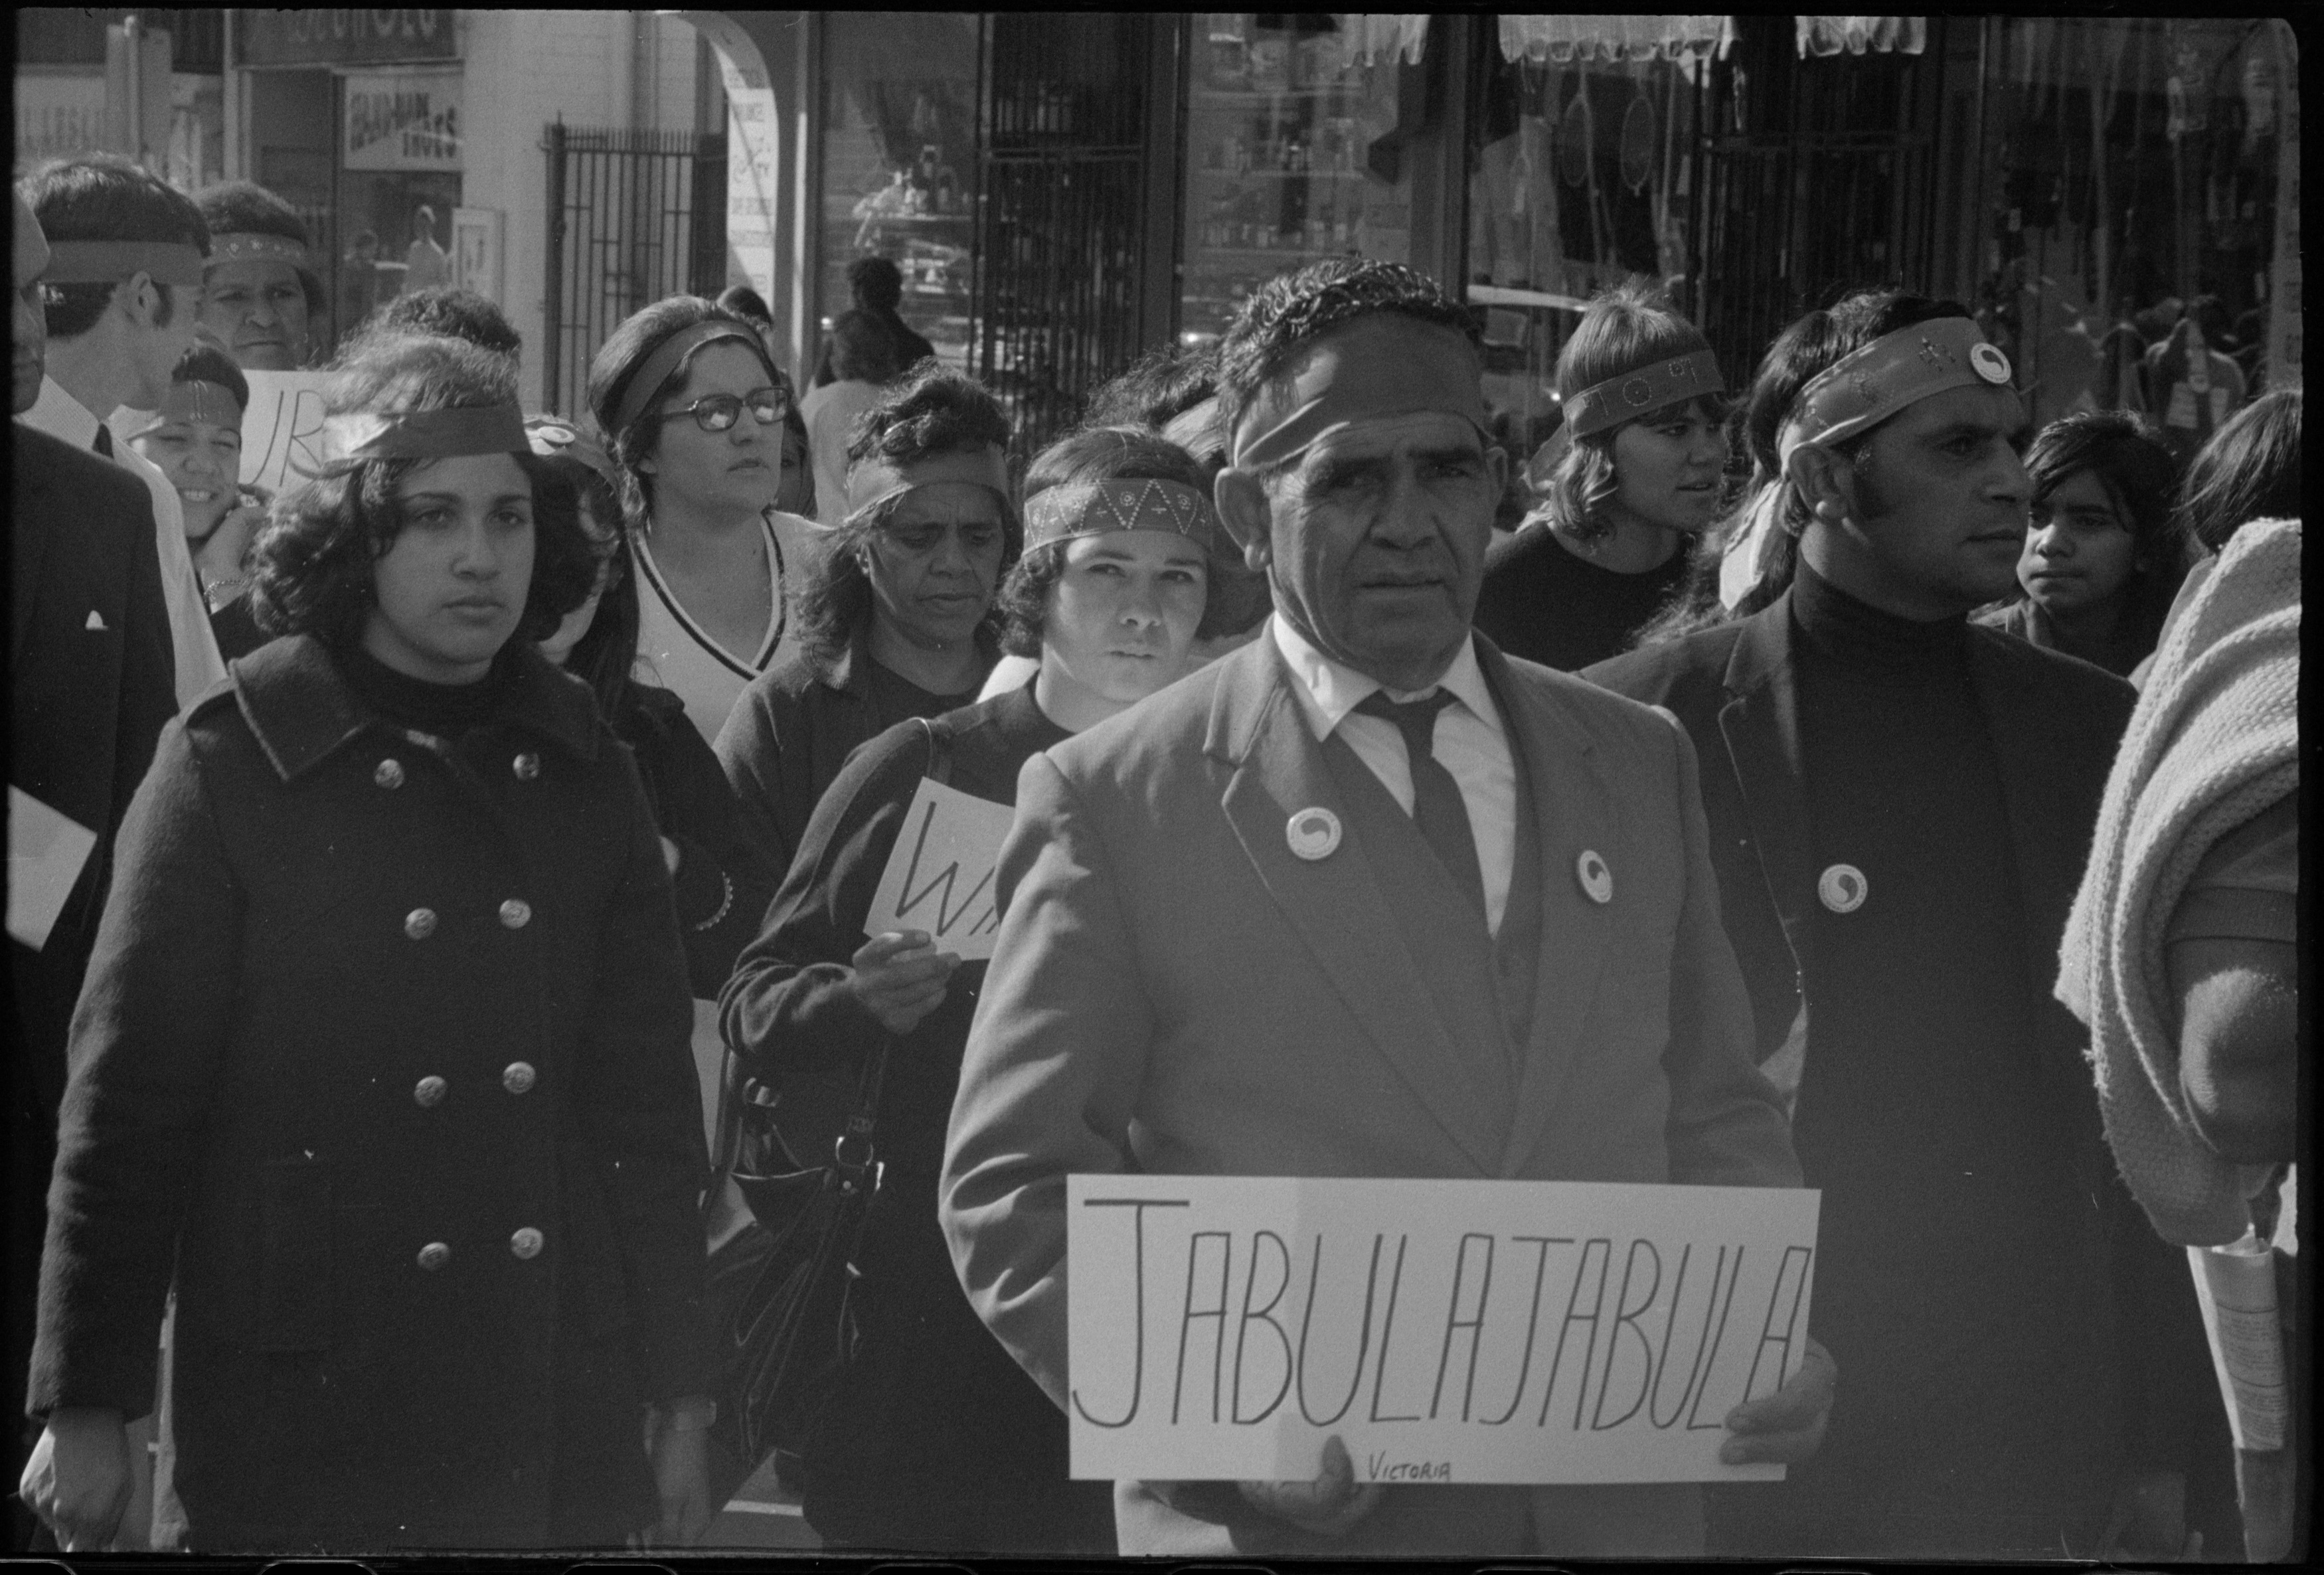 Man walking in protest group holding a placard